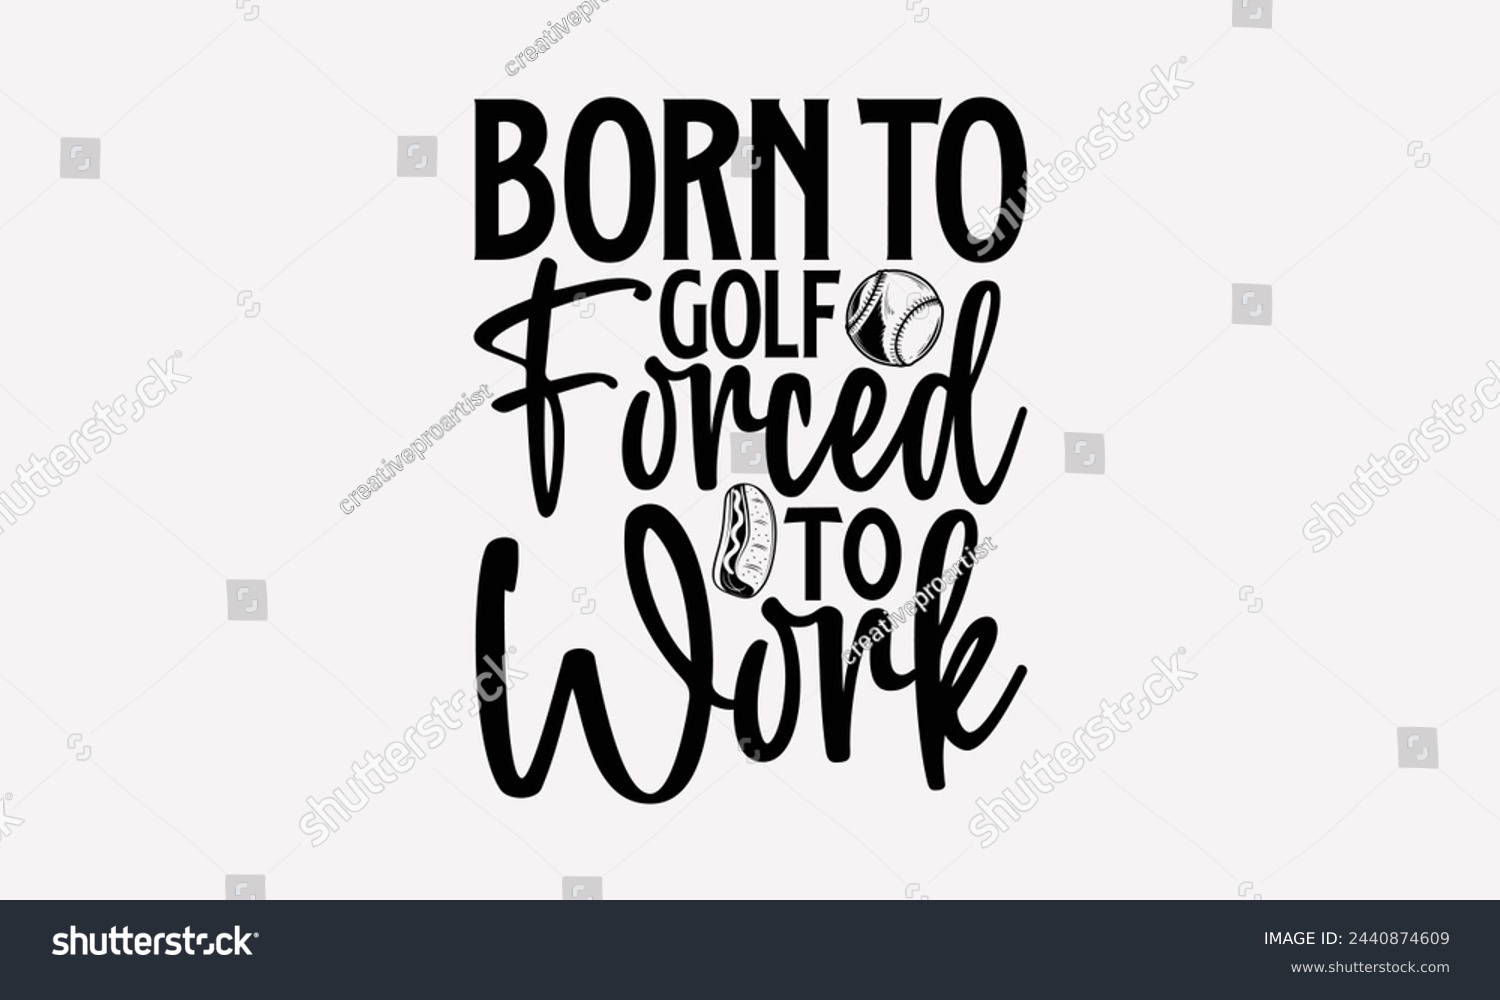 SVG of Born To Golf Forced To Work- Golf t- shirt design, Hand drawn lettering phrase isolated on white background, for Cutting Machine, Silhouette Cameo, Cricut, greeting card template with typography text svg